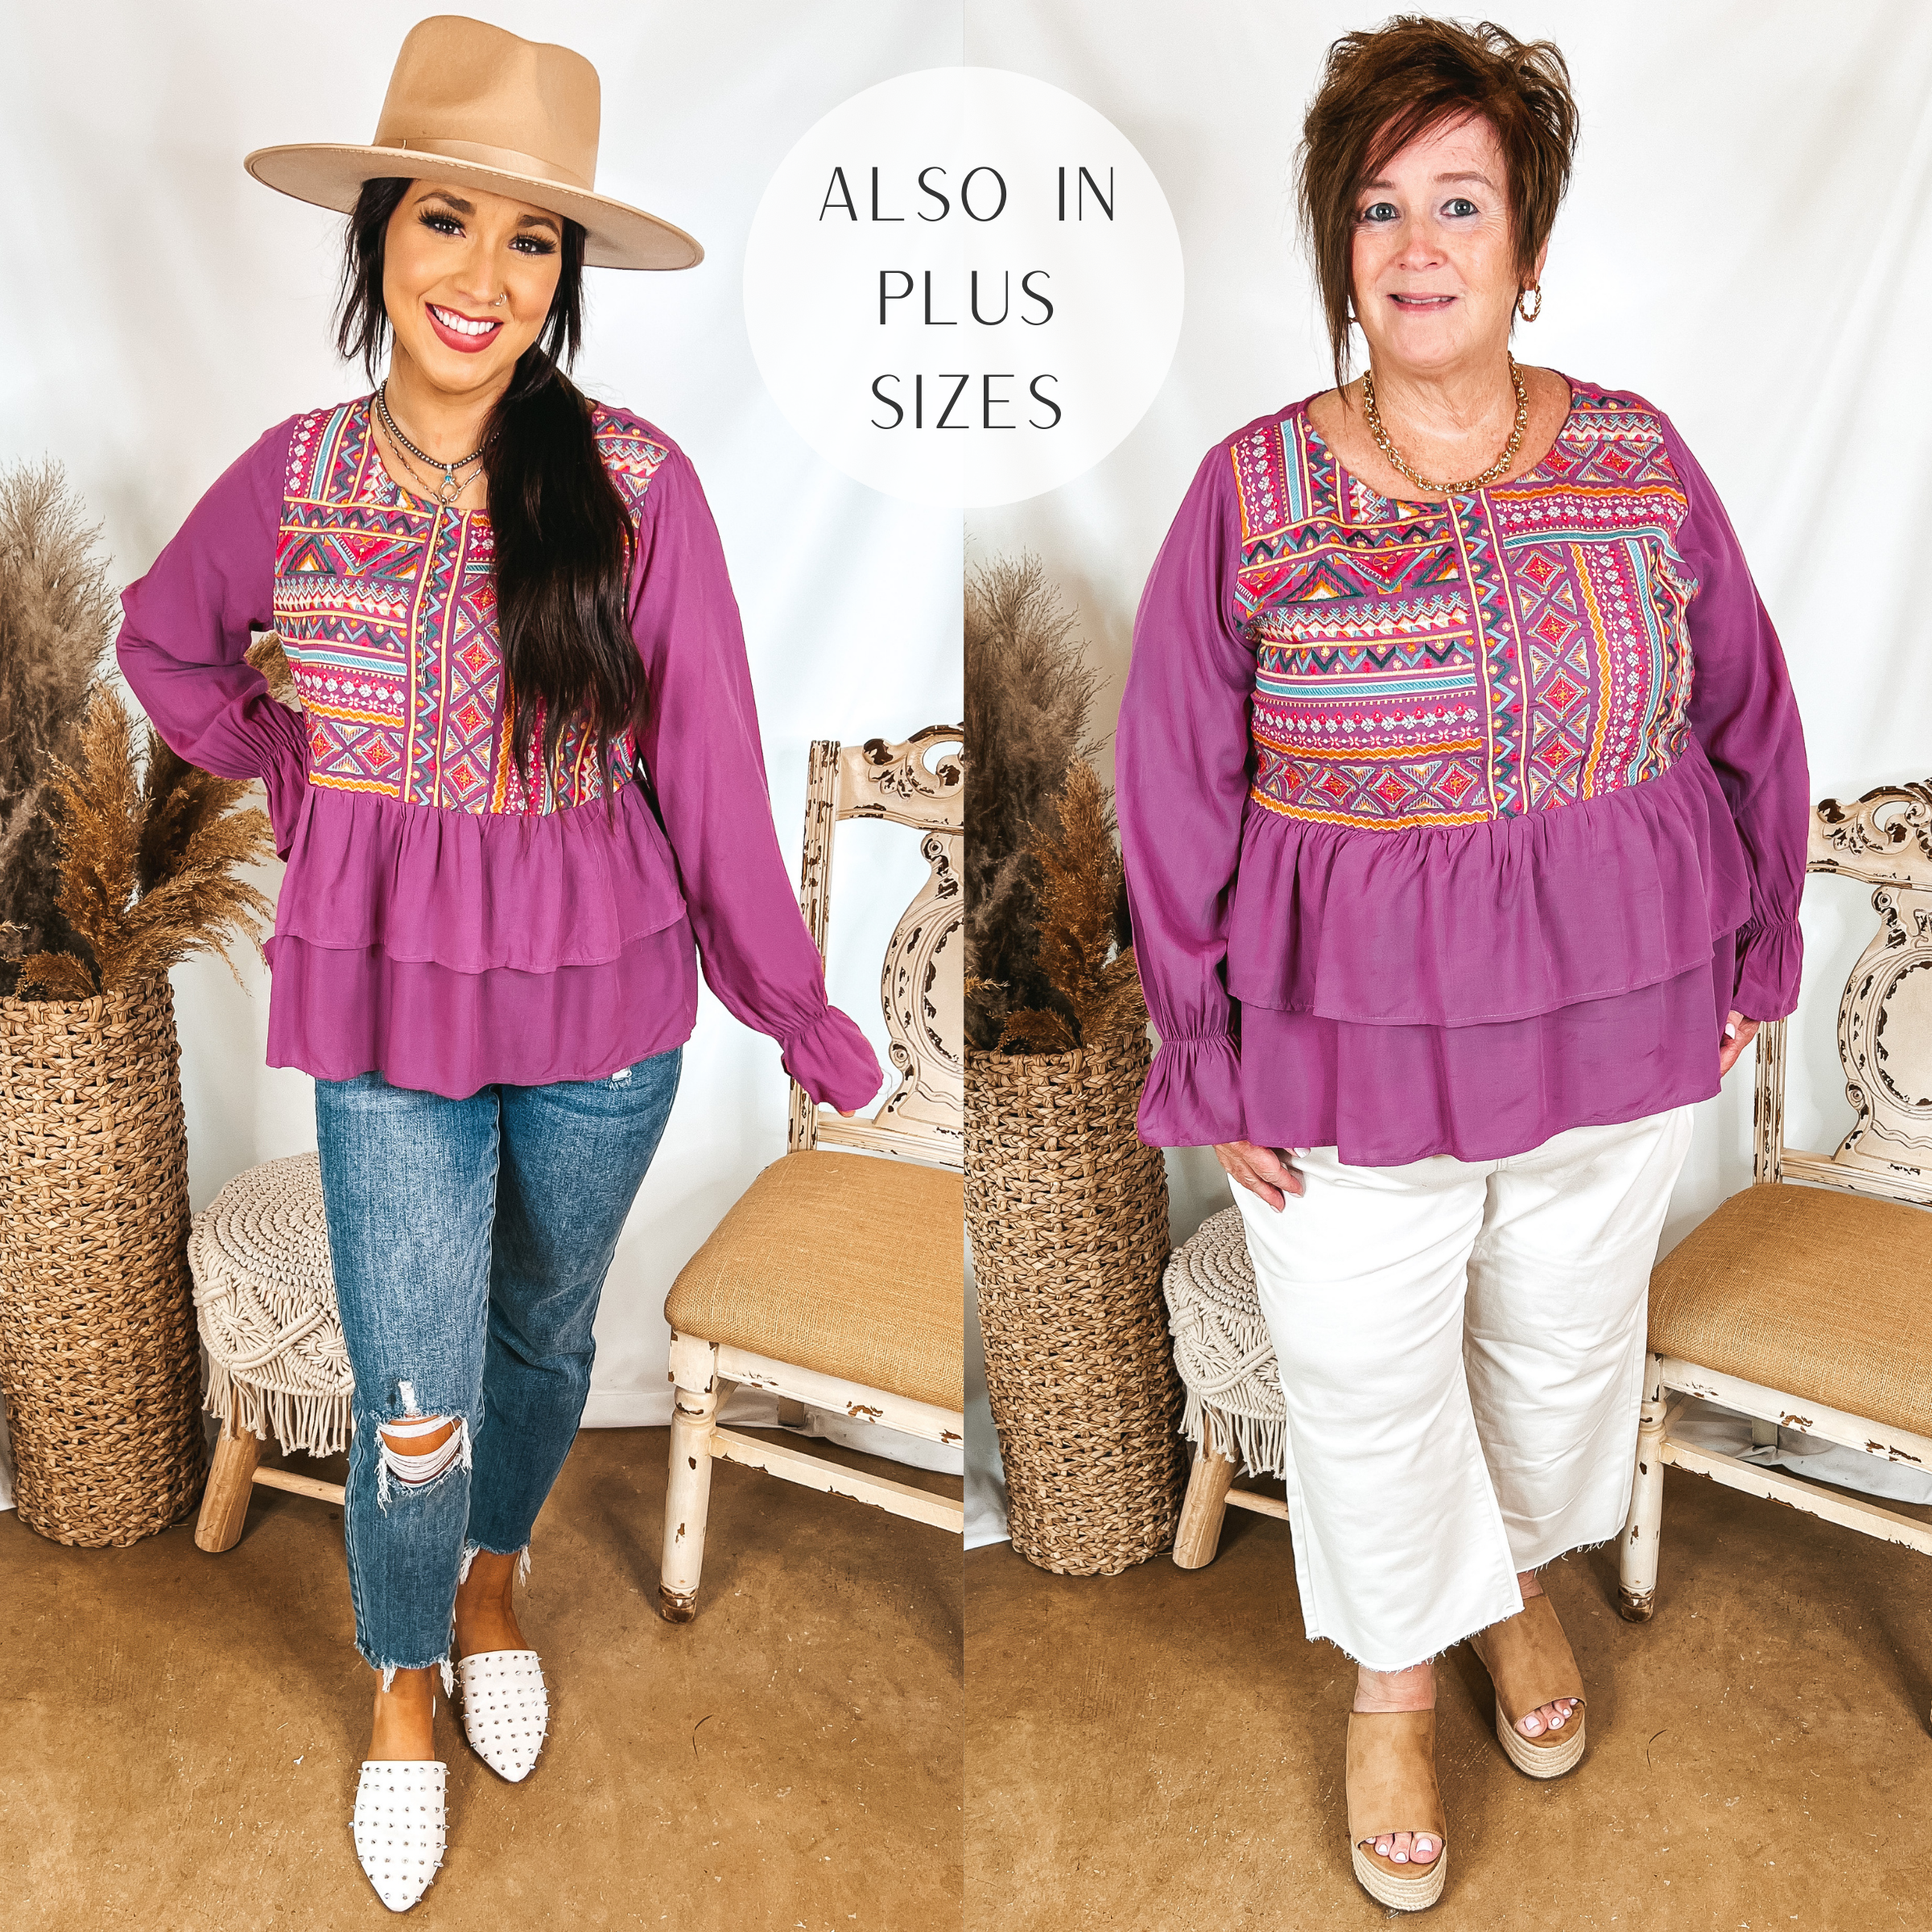 Models are wearing a purple long sleeve top that has colorful embroidery on the front. Size small model has it paired with distressed boyfriend jeans, white mules, and a tan hat. Size large model has it paired with white cropped jeans, tan wedges, and gold jewelry.